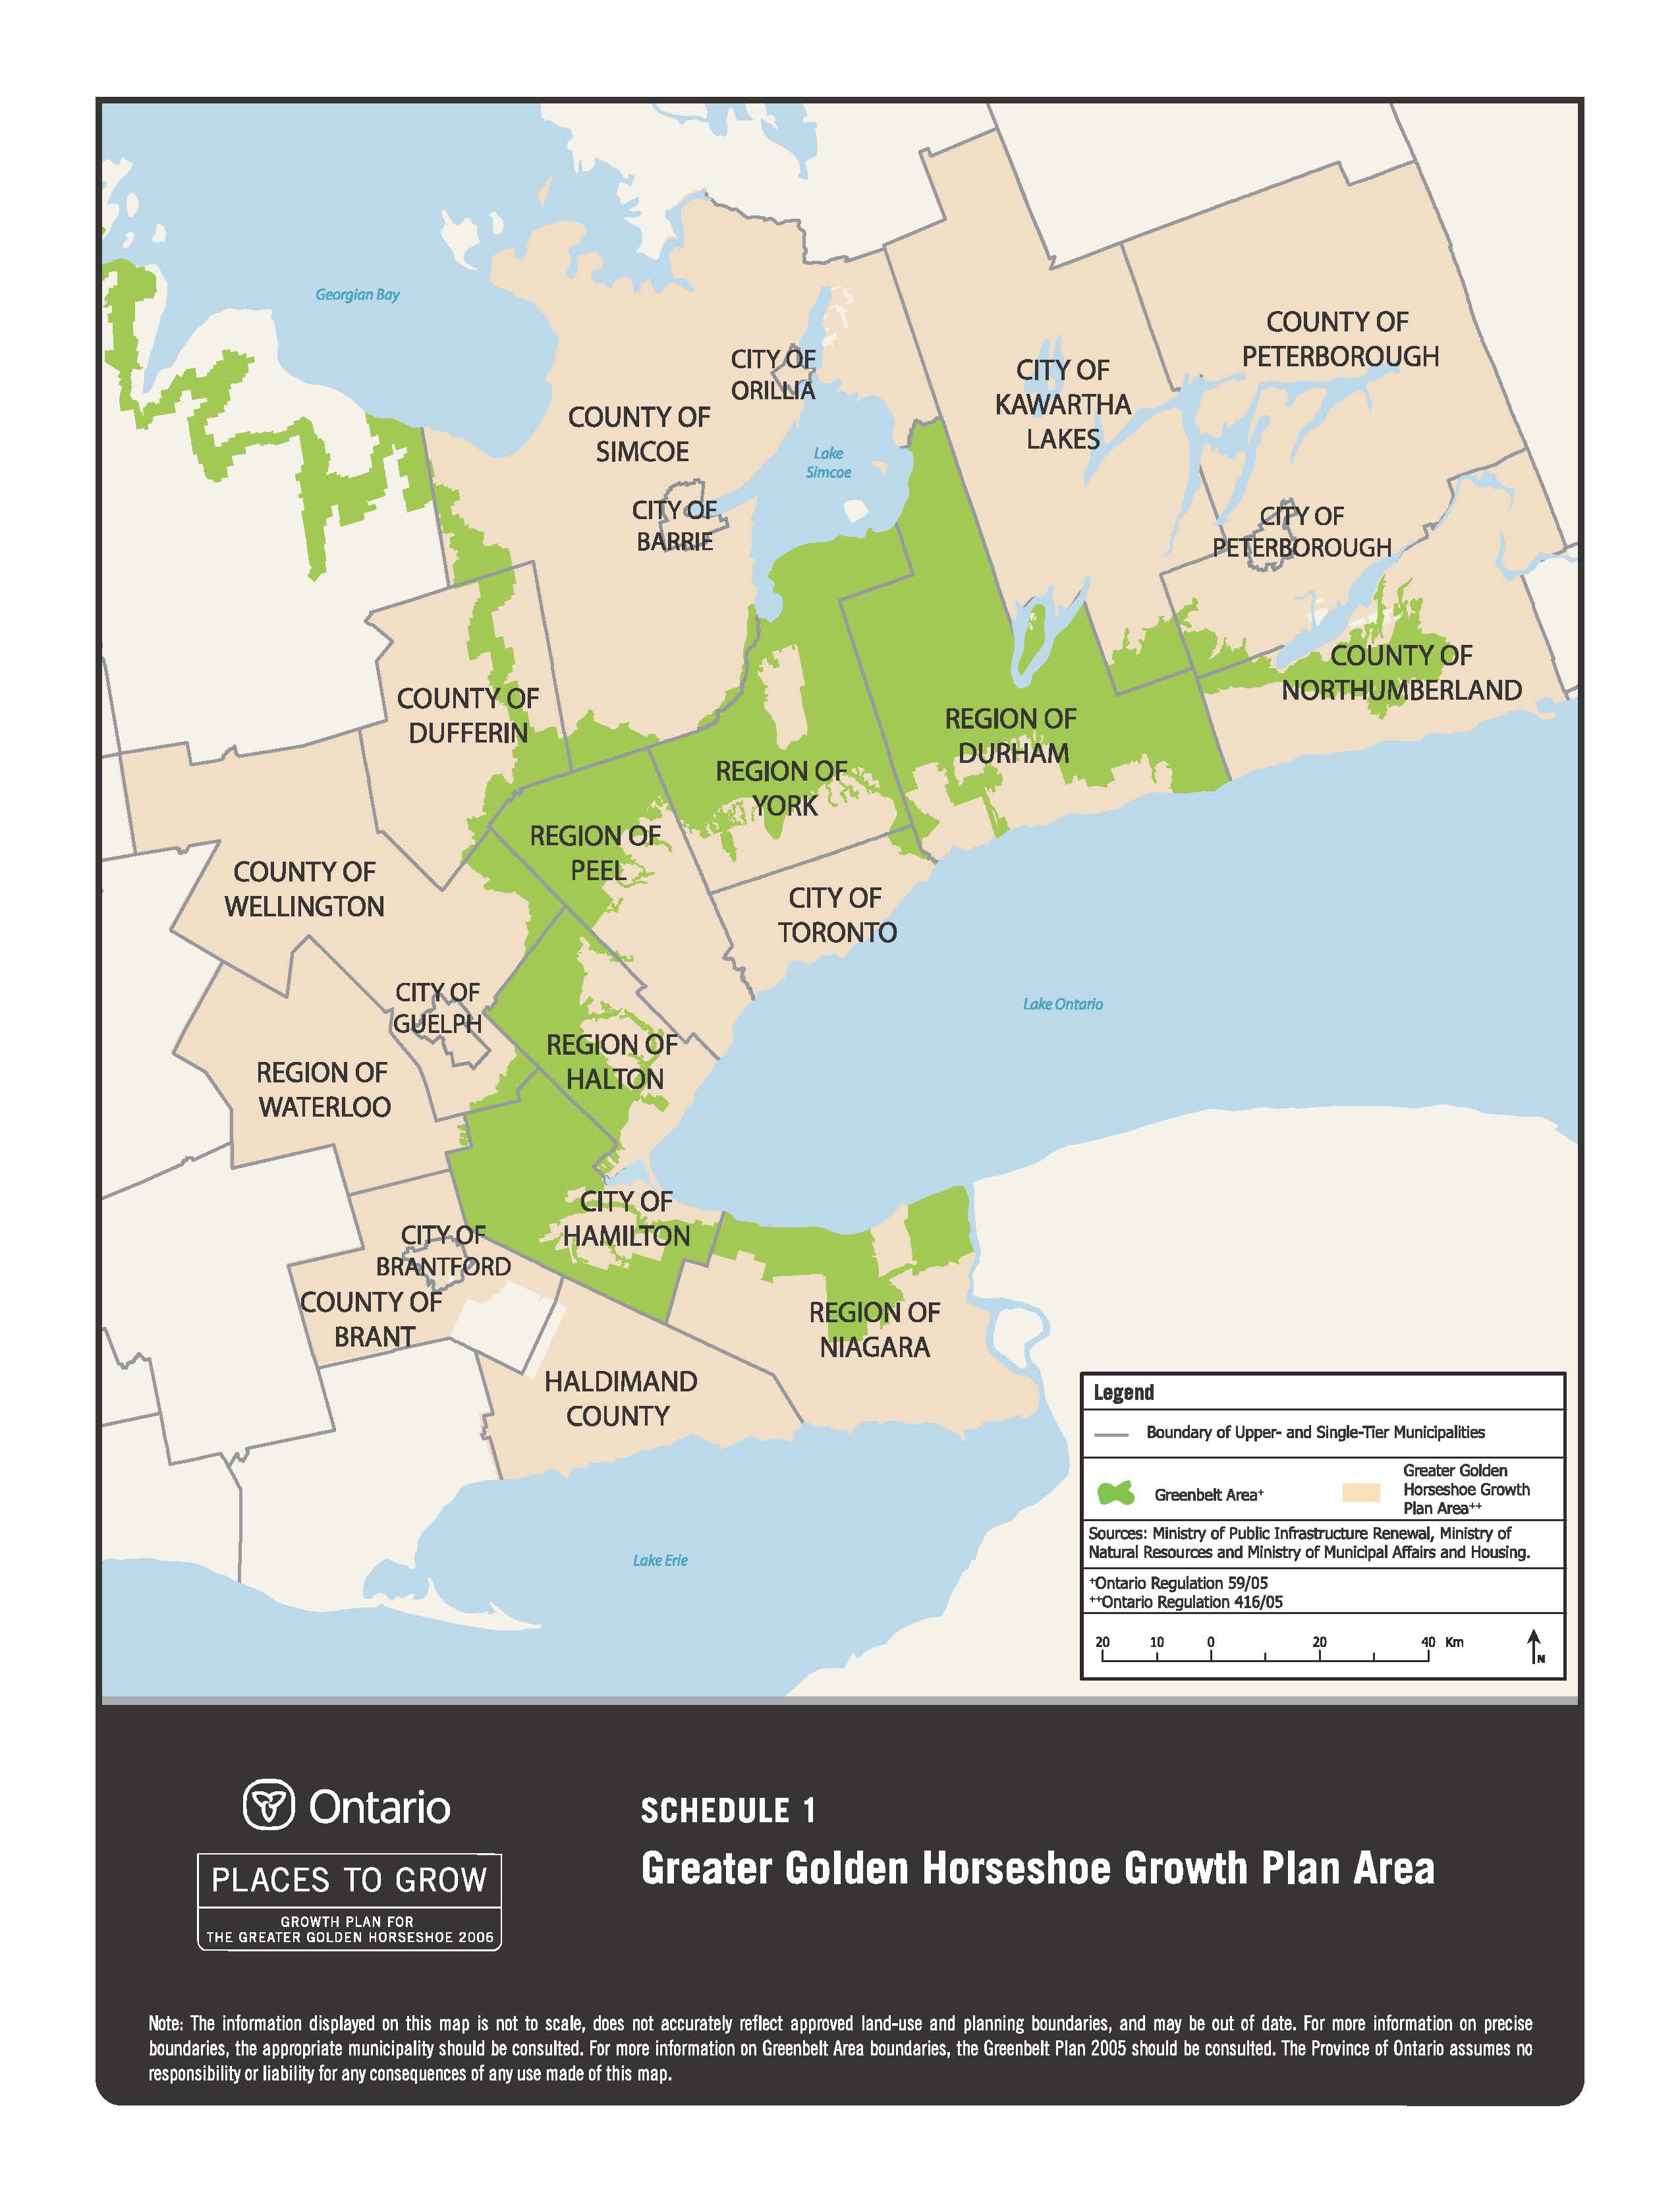 Schedule 1 - Greater Golden Horseshoe Growth Plan Area (map)